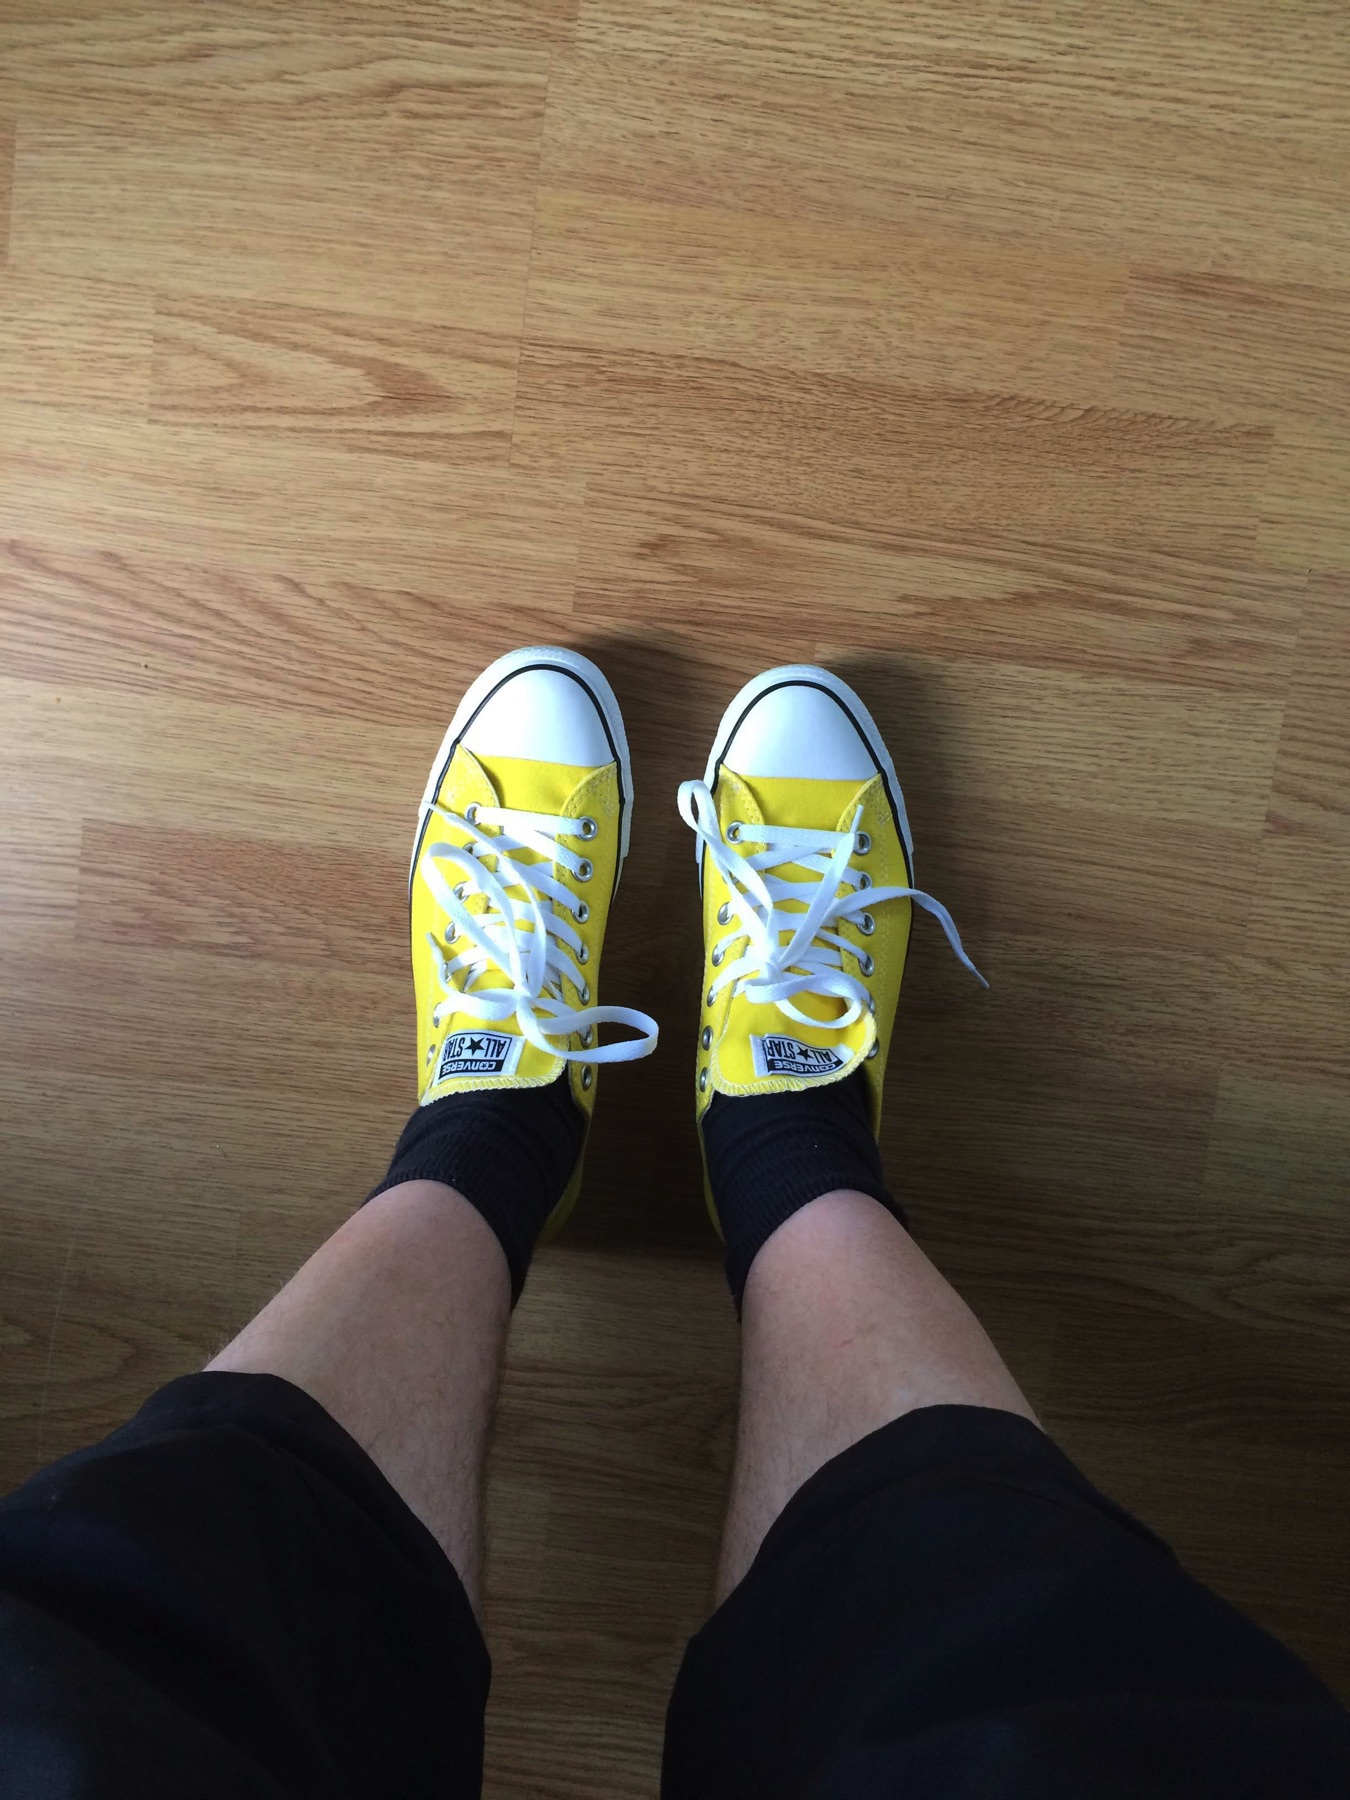 yellow converse all stars, floor, two feet